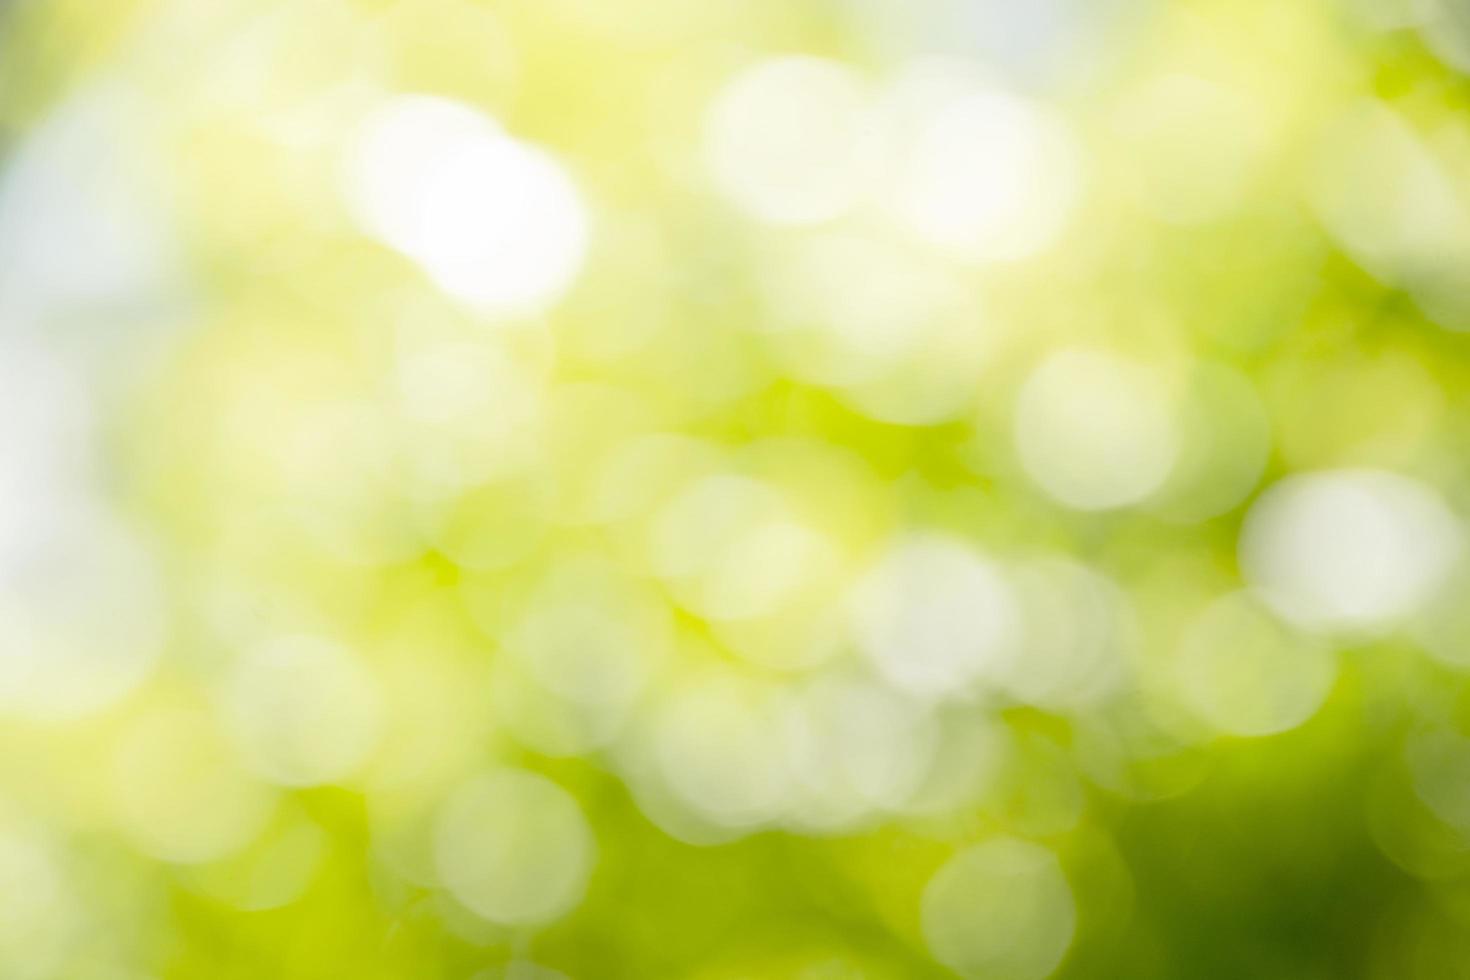 Green bokeh on nature defocus art abstract blur background blurred of green leaf with morning light photo